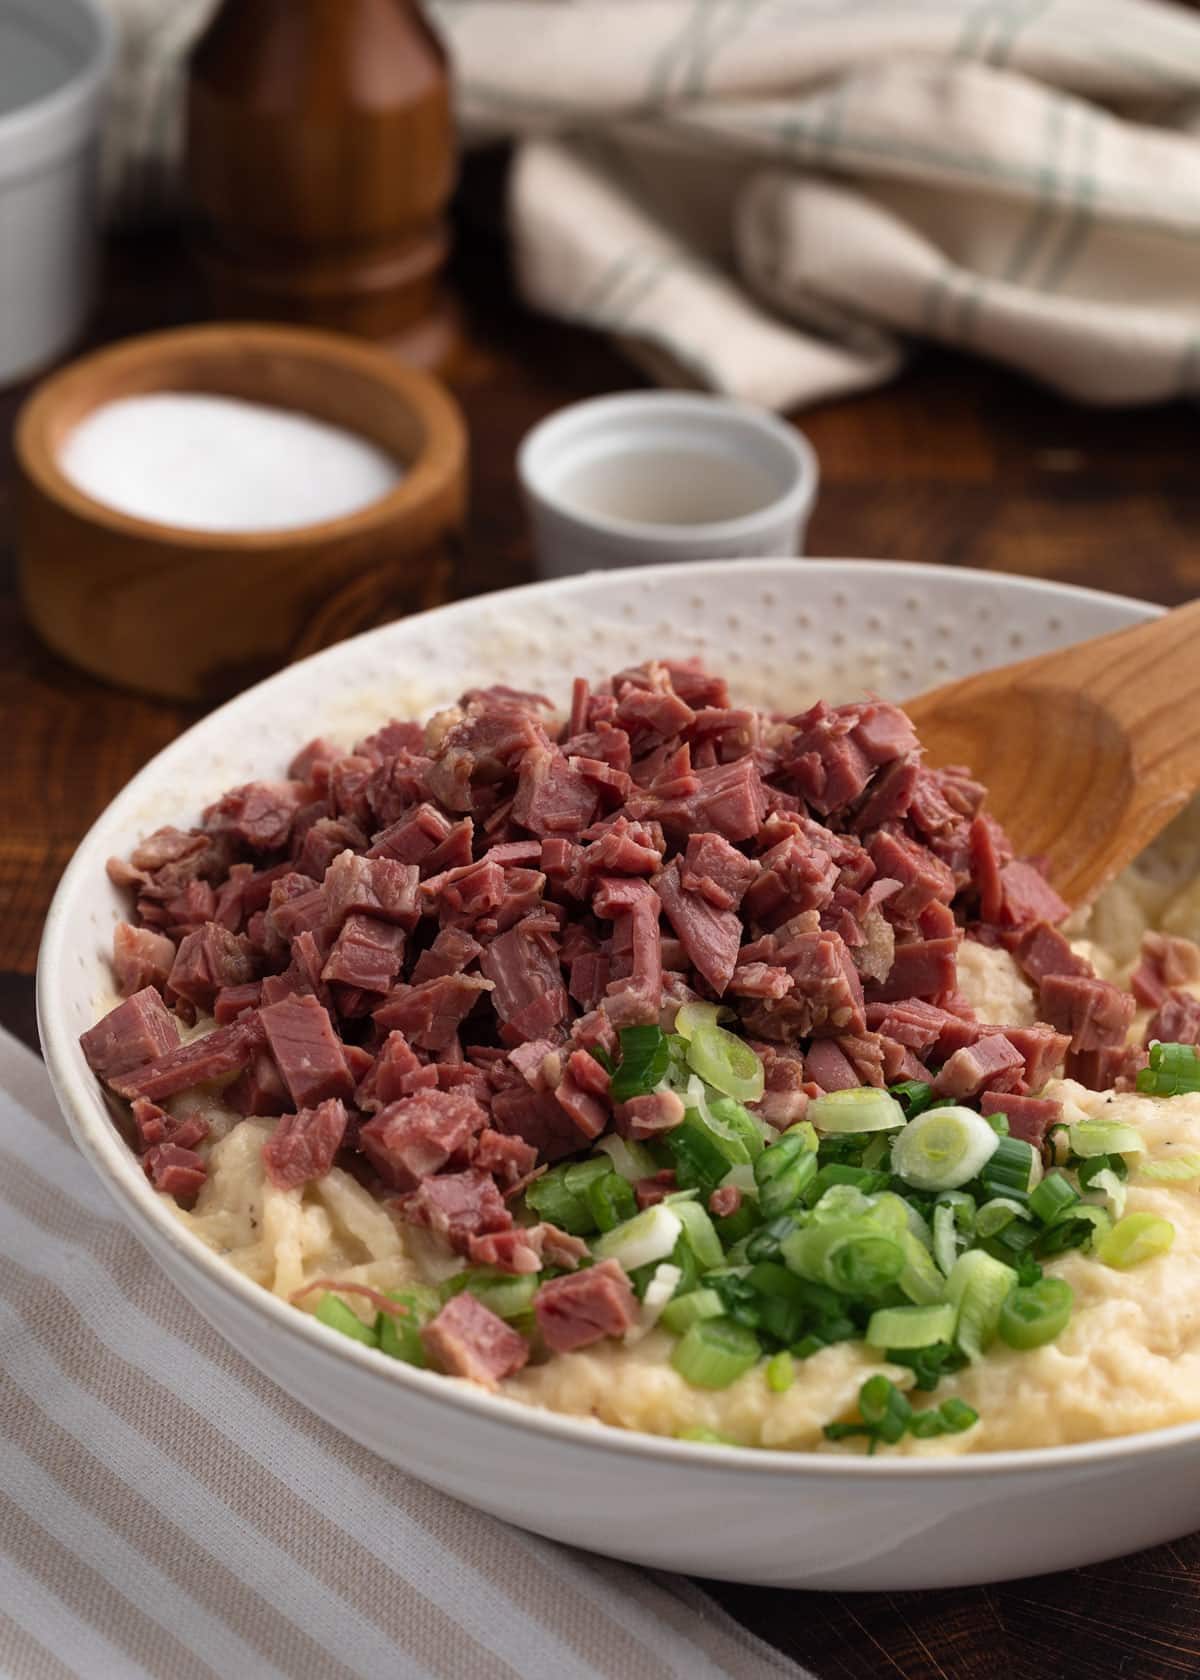 diced corned beef and sliced scallions added to an ivory bowl of potato pancake batter with a wooden spoon